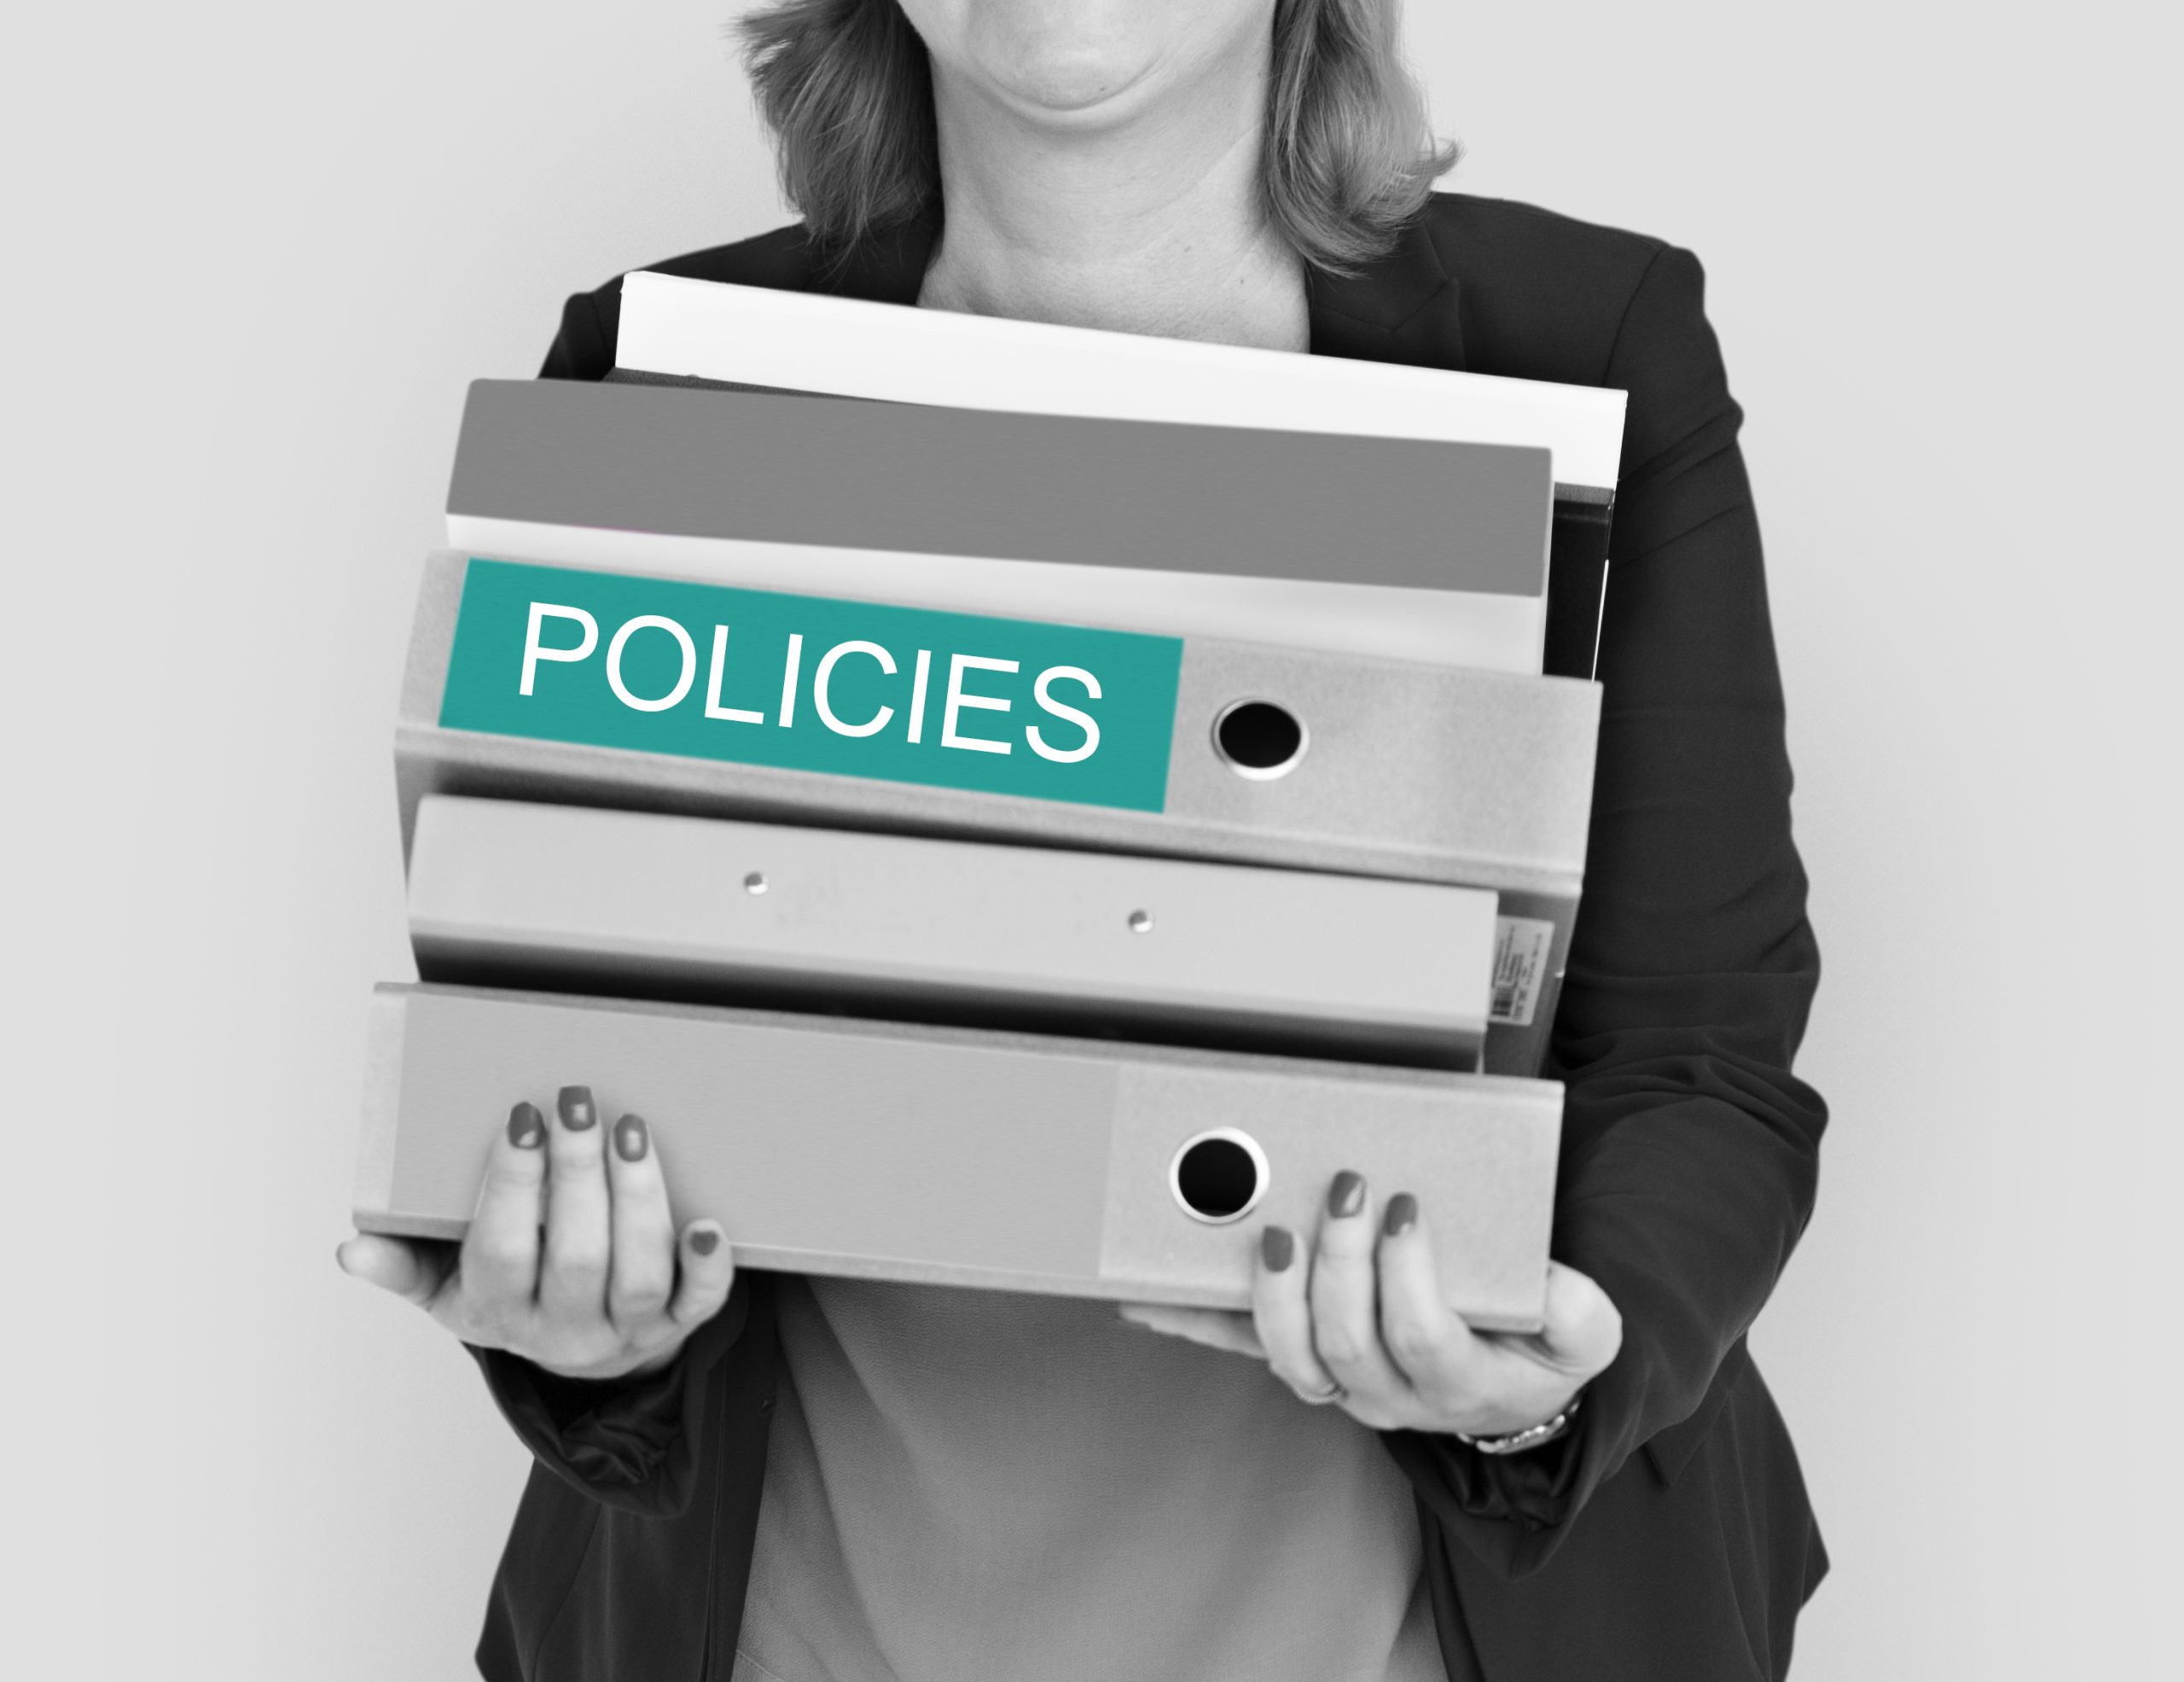 woman carrying binders for policies